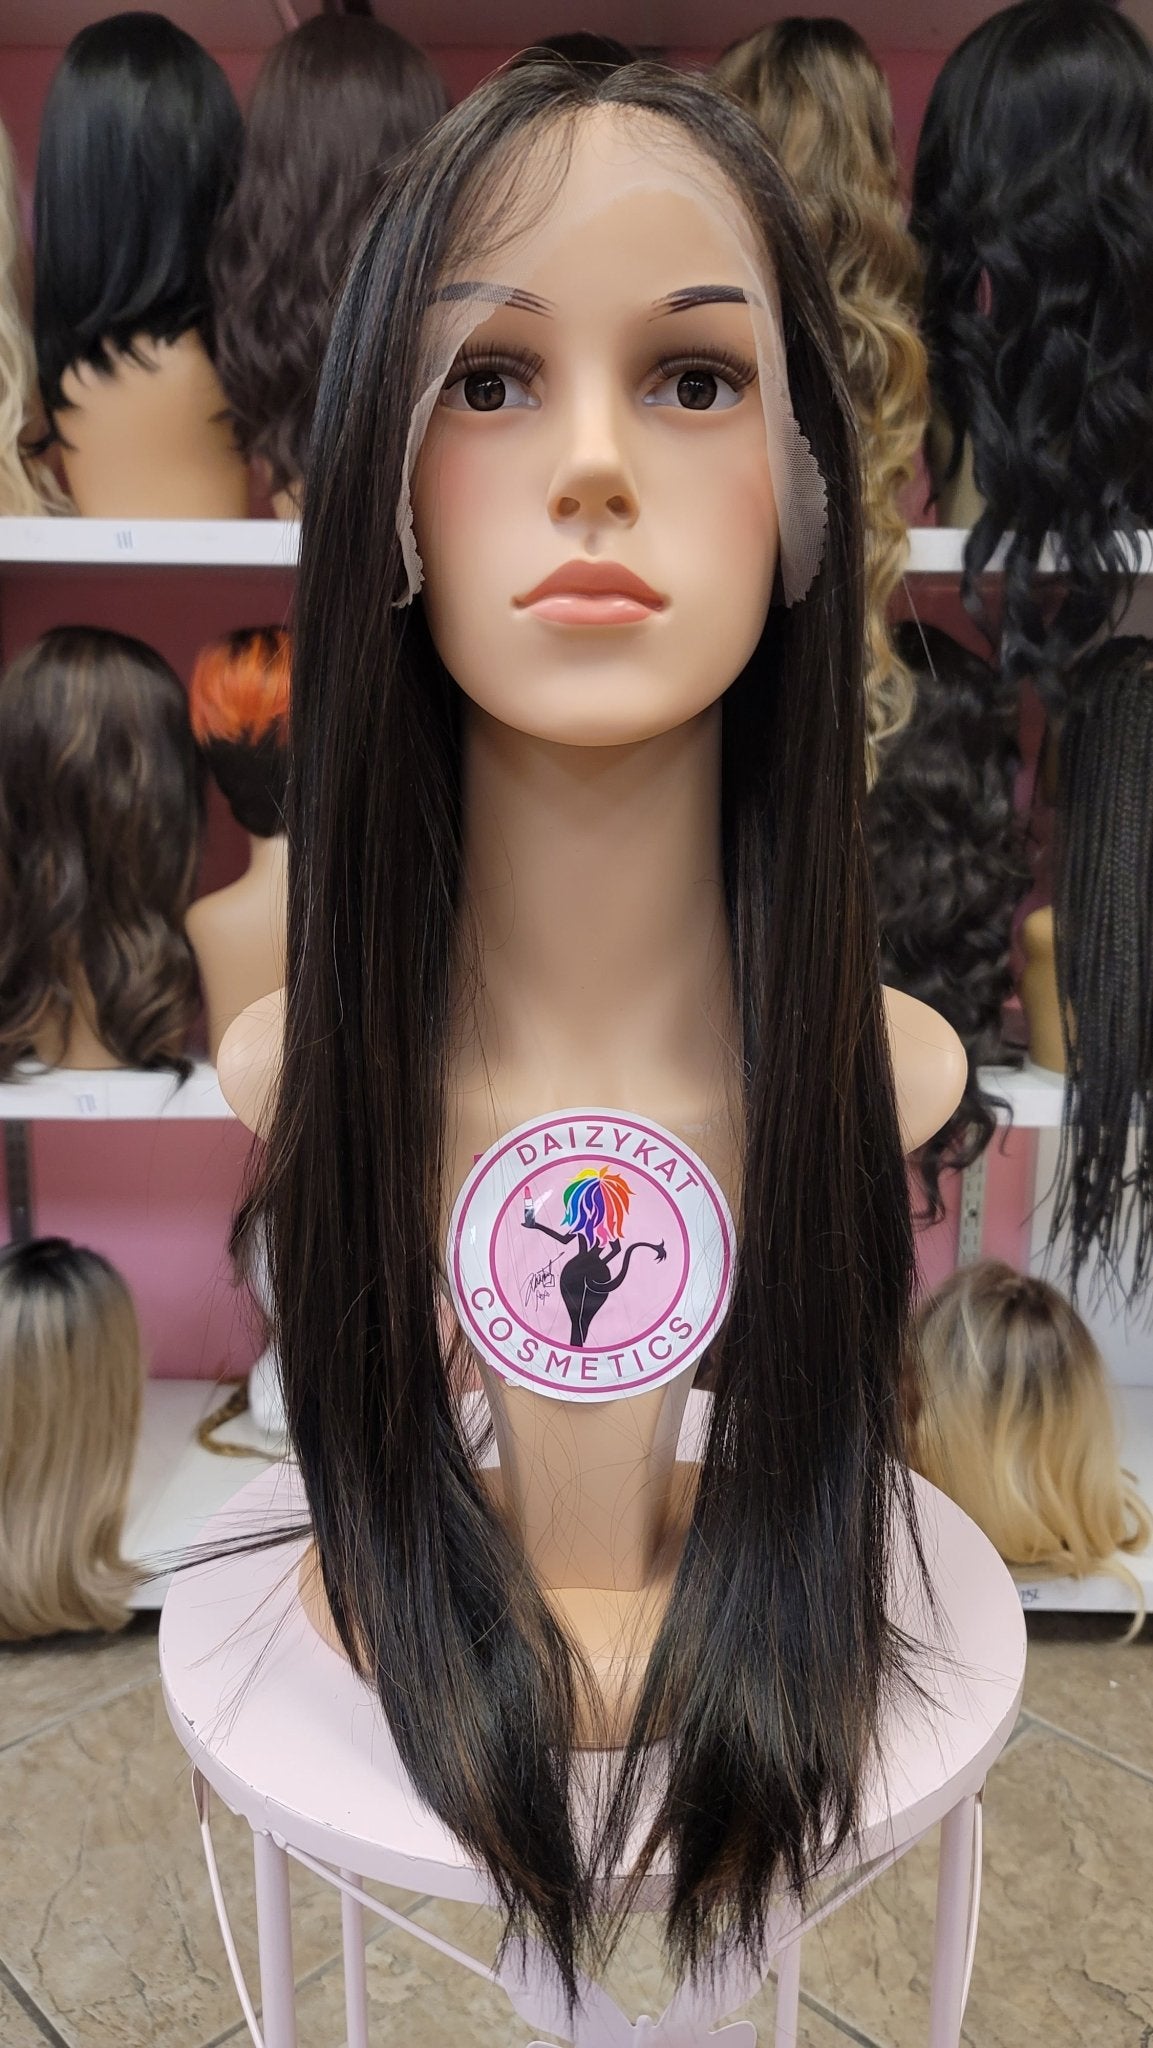 350 Alex - Middle Part Lace Front Wig - 1B/30 - DaizyKat Cosmetics 350 Alex - Middle Part Lace Front Wig - 1B/30 DaizyKat Cosmetics Wigs